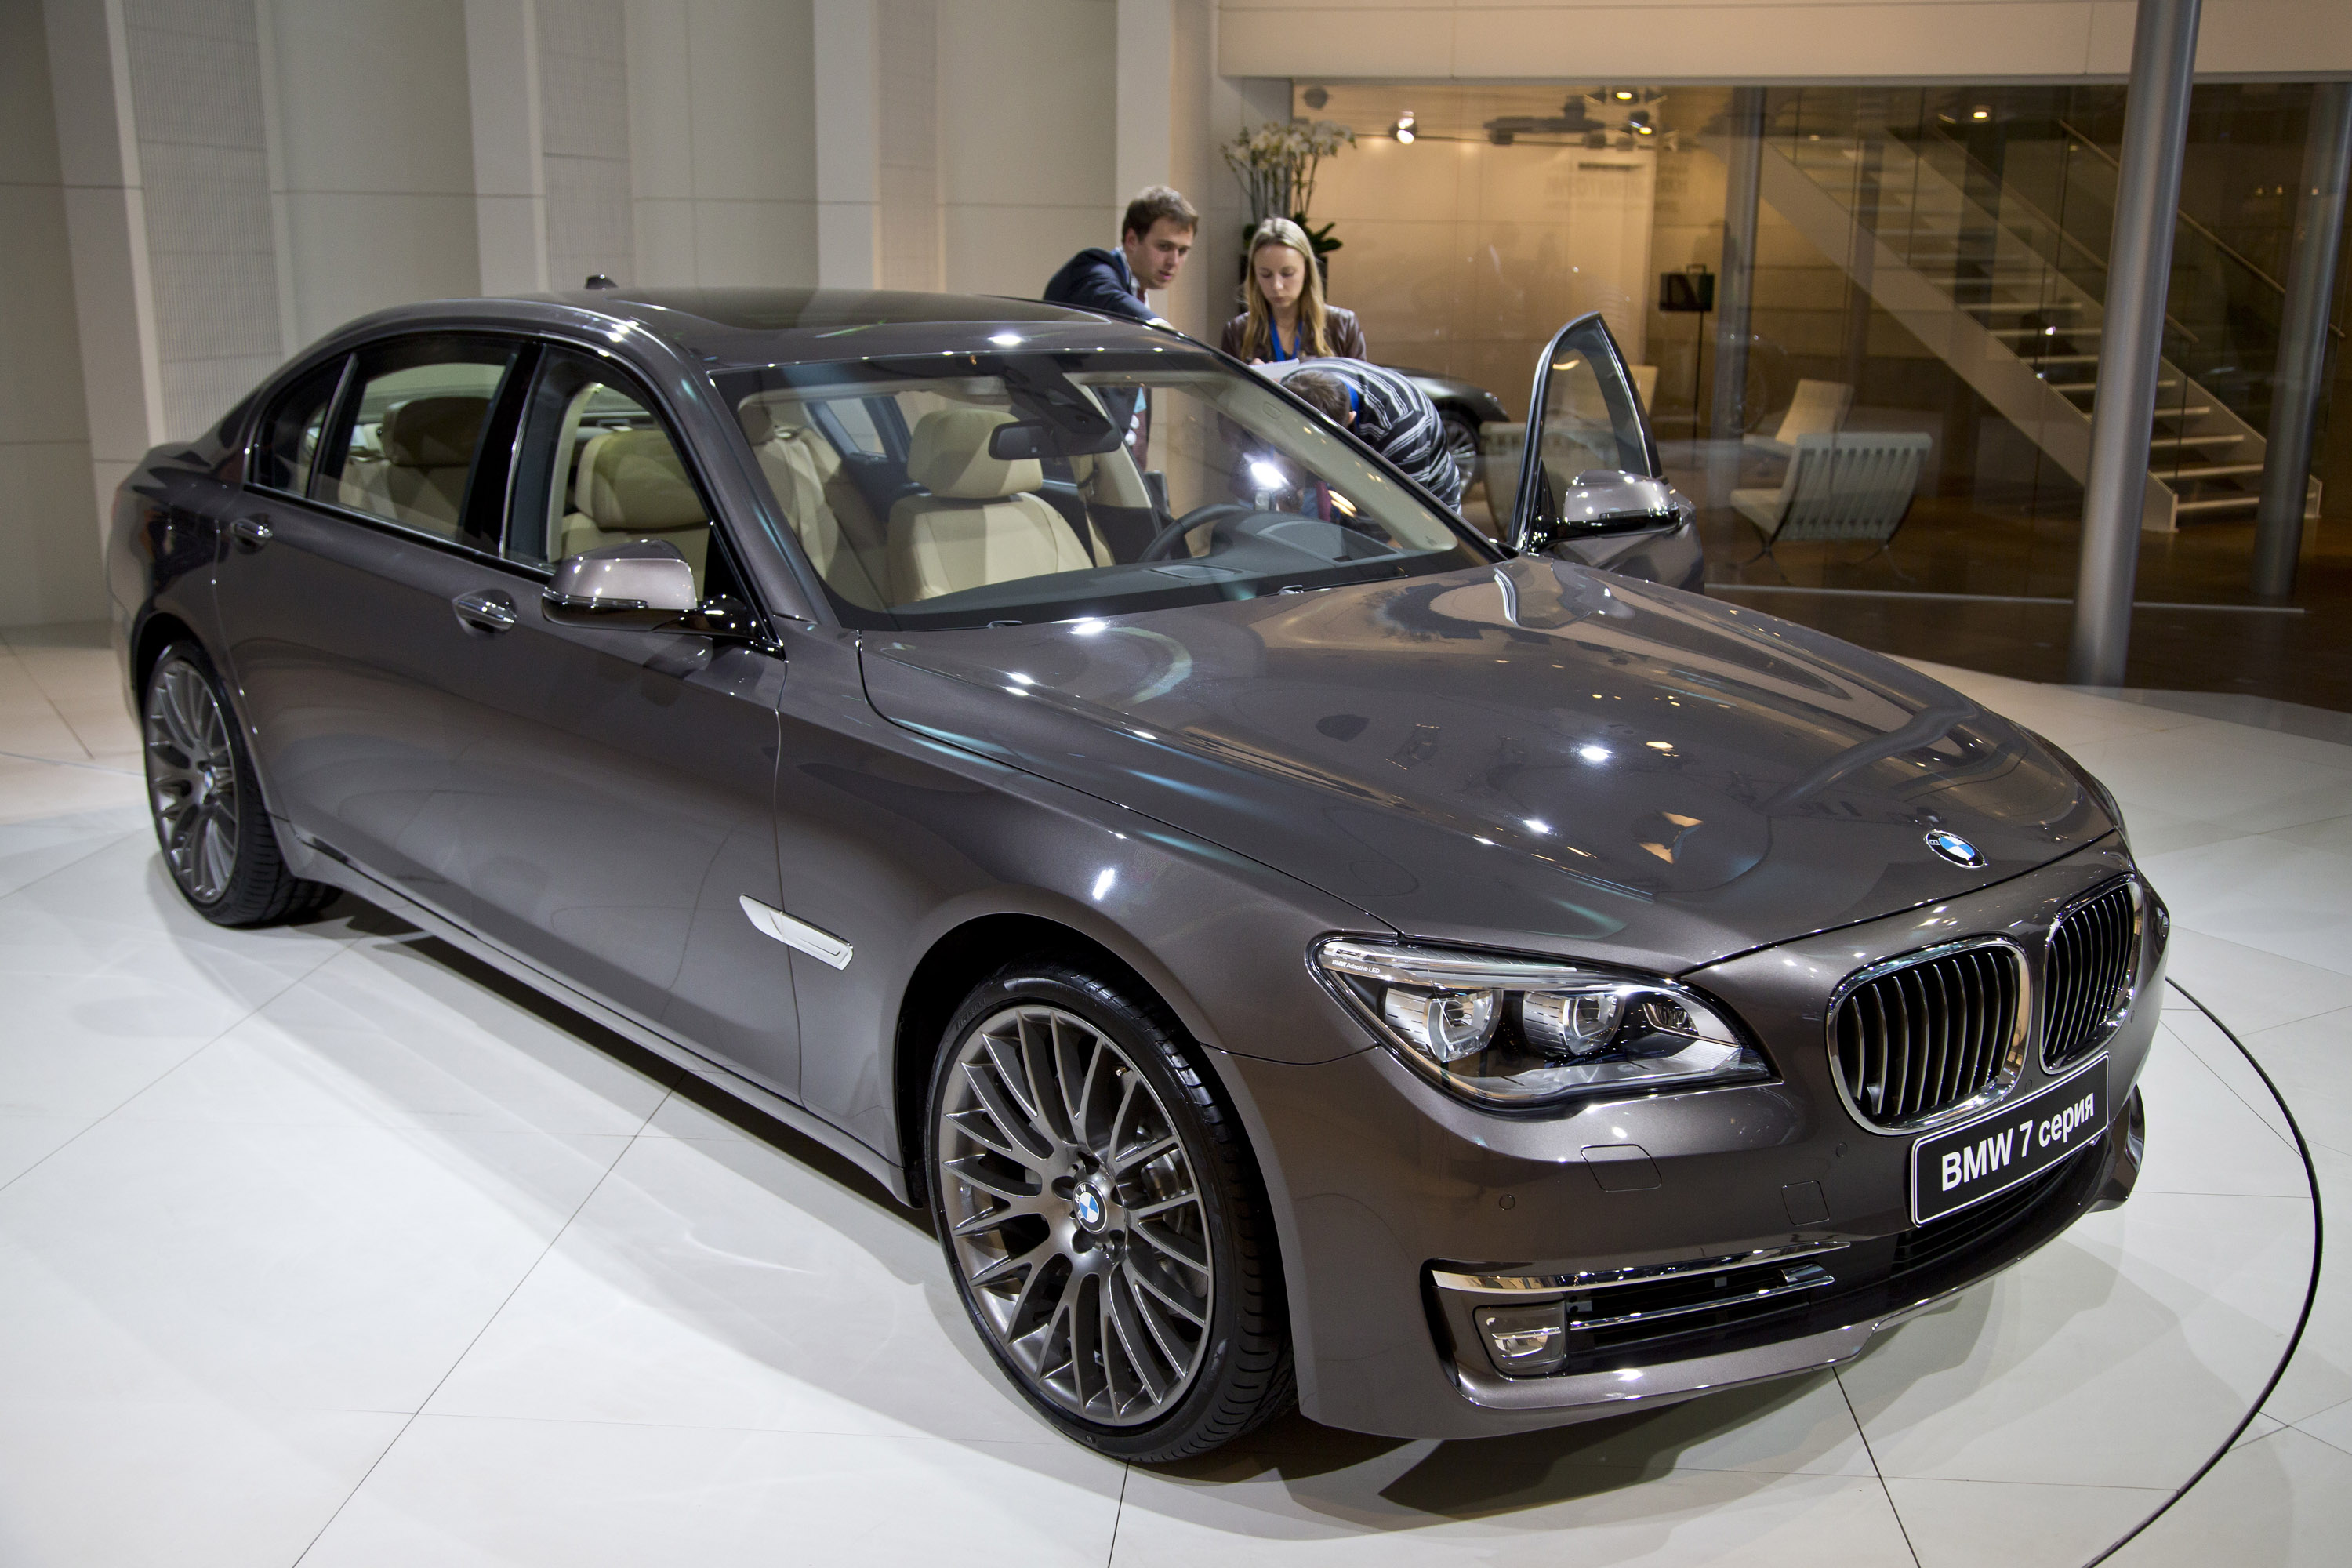 Bmw 7 series unveiling moscow #1